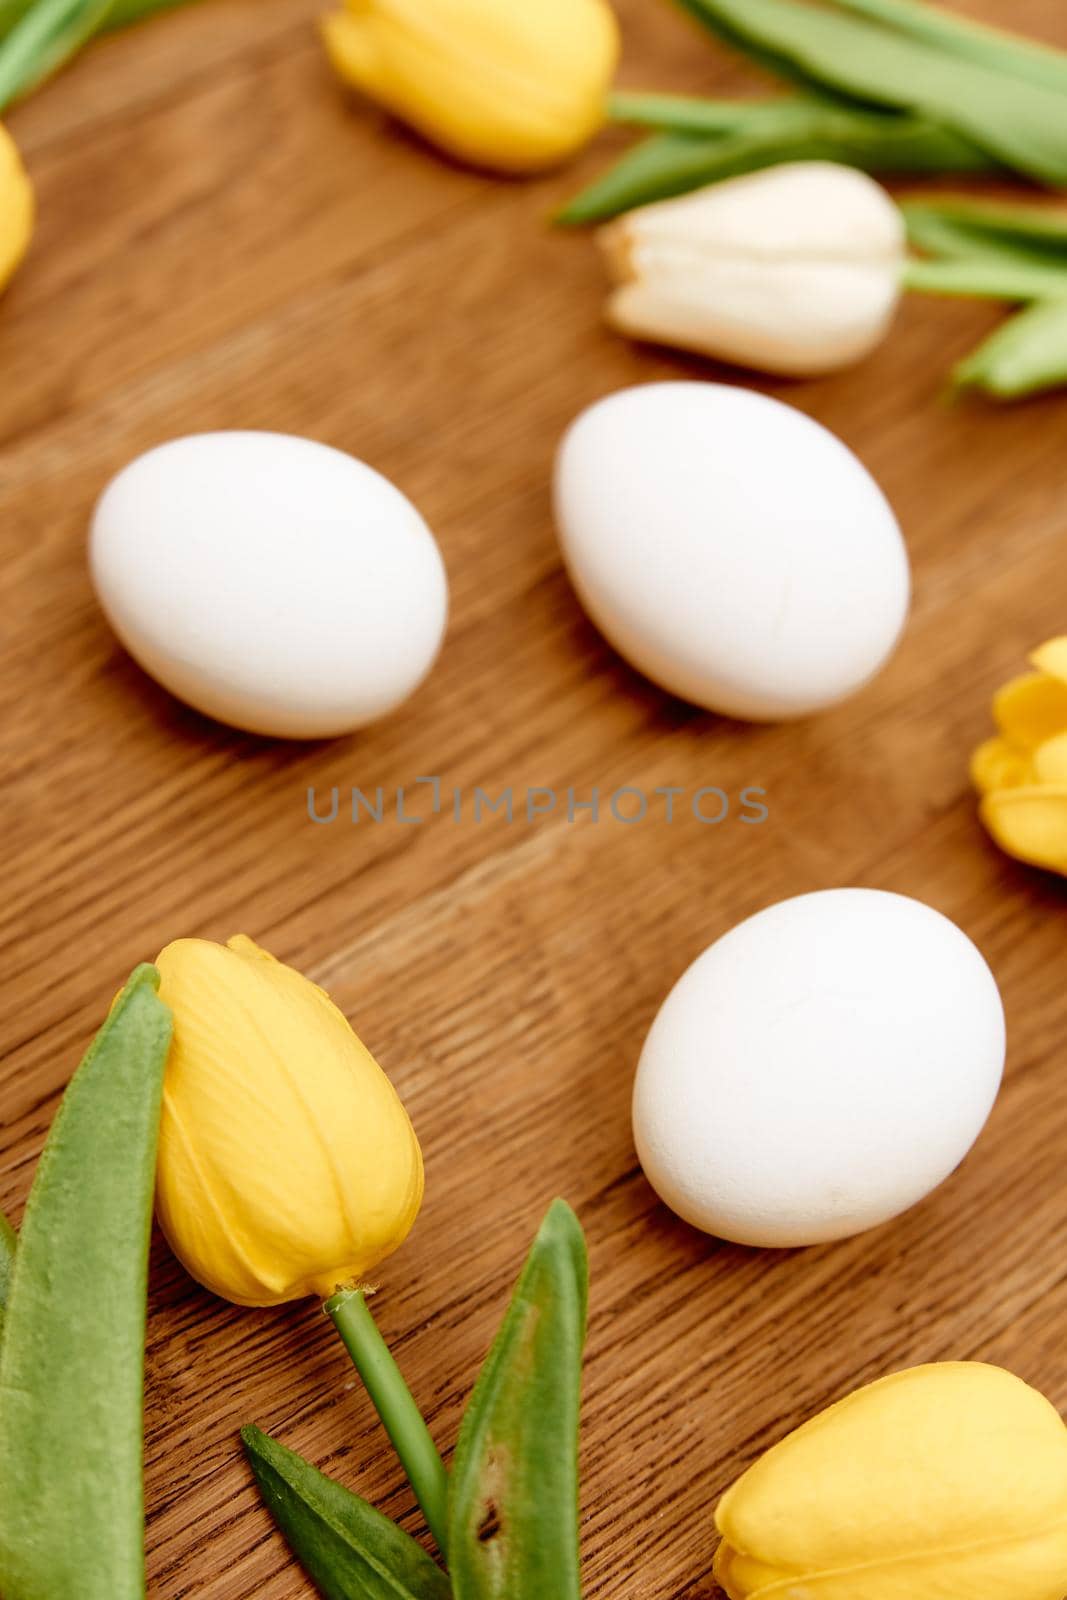 chicken eggs bouquet flowers wooden background close-up easter. High quality photo